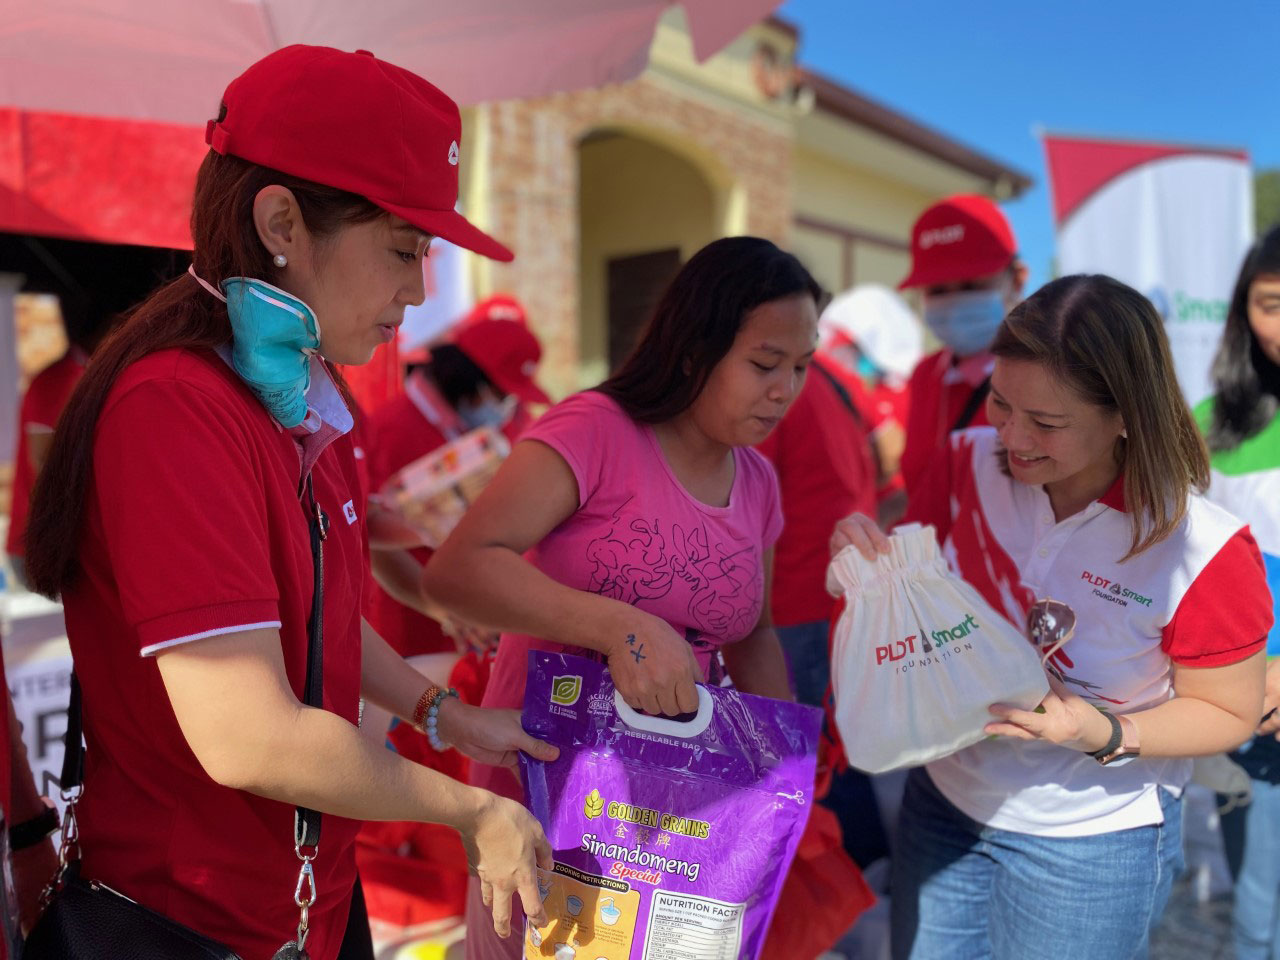 PLDT Community Relations Head Katherine Diaz De Rivera and PLDT-Smart Foundation President Esther Santos give relief packs to a Taal Volcano eruption evacuee on Thursday at the Sto. Tomas North Central School in Sto. Tomas, Batangas.